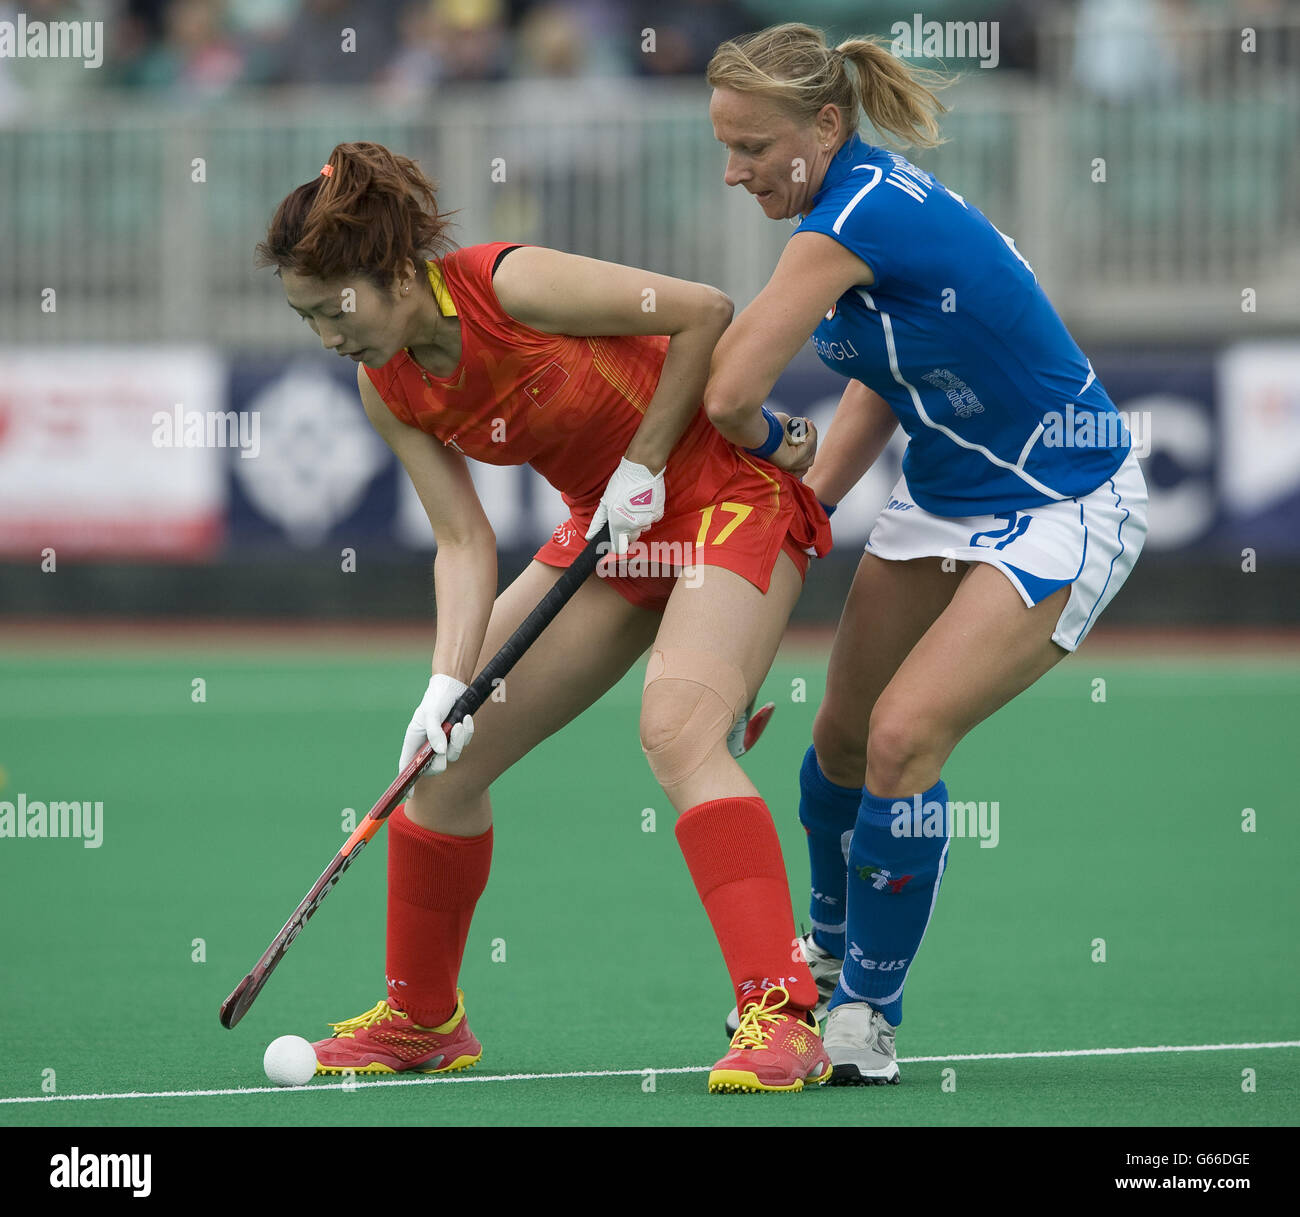 China's Li Hongxia challenges with the Italy's Agata Wybierelska during the opening group game in the Investec World League Semi Final, Chiswick. Stock Photo